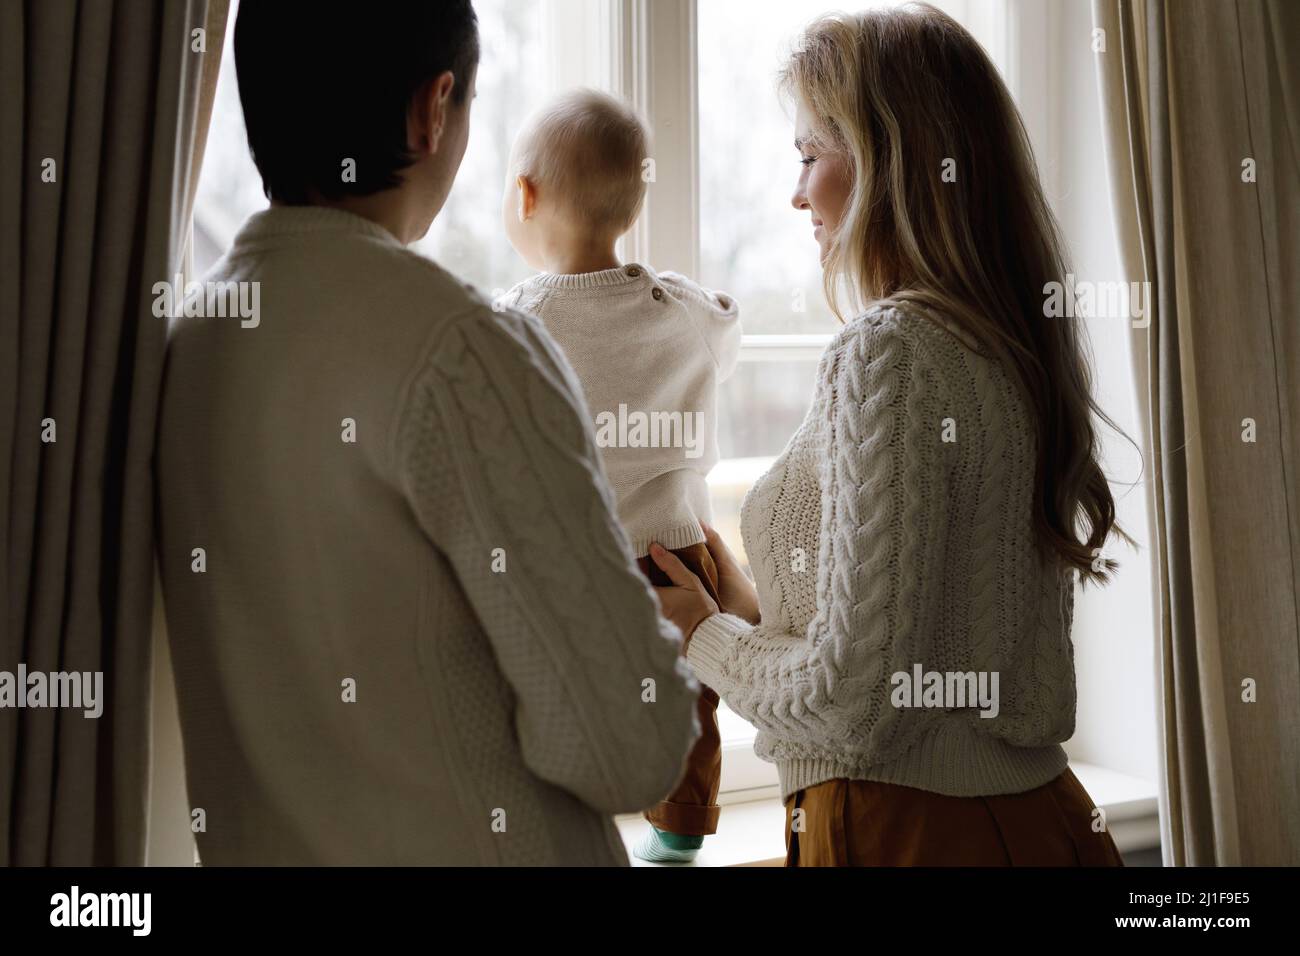 Young family at home is looking out the window Stock Photo